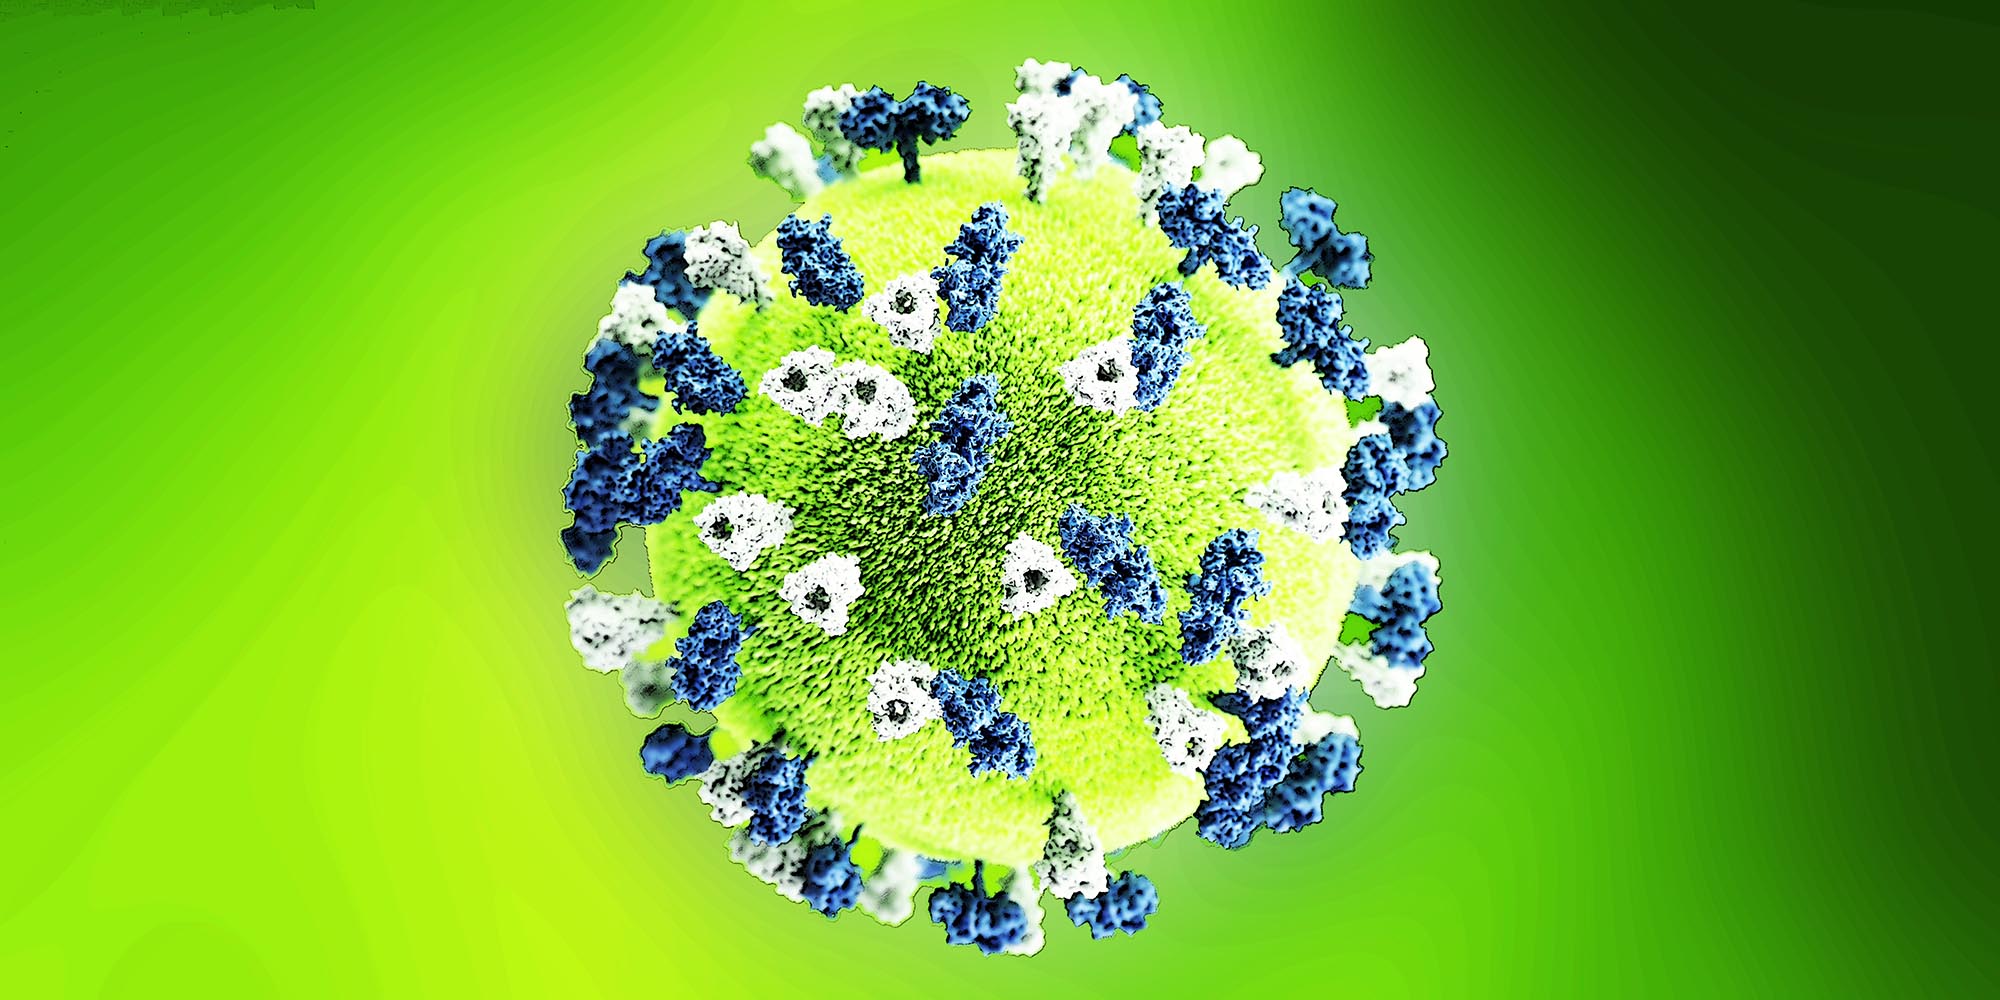 Top 3 Coronavirus Facts You Didn't Know